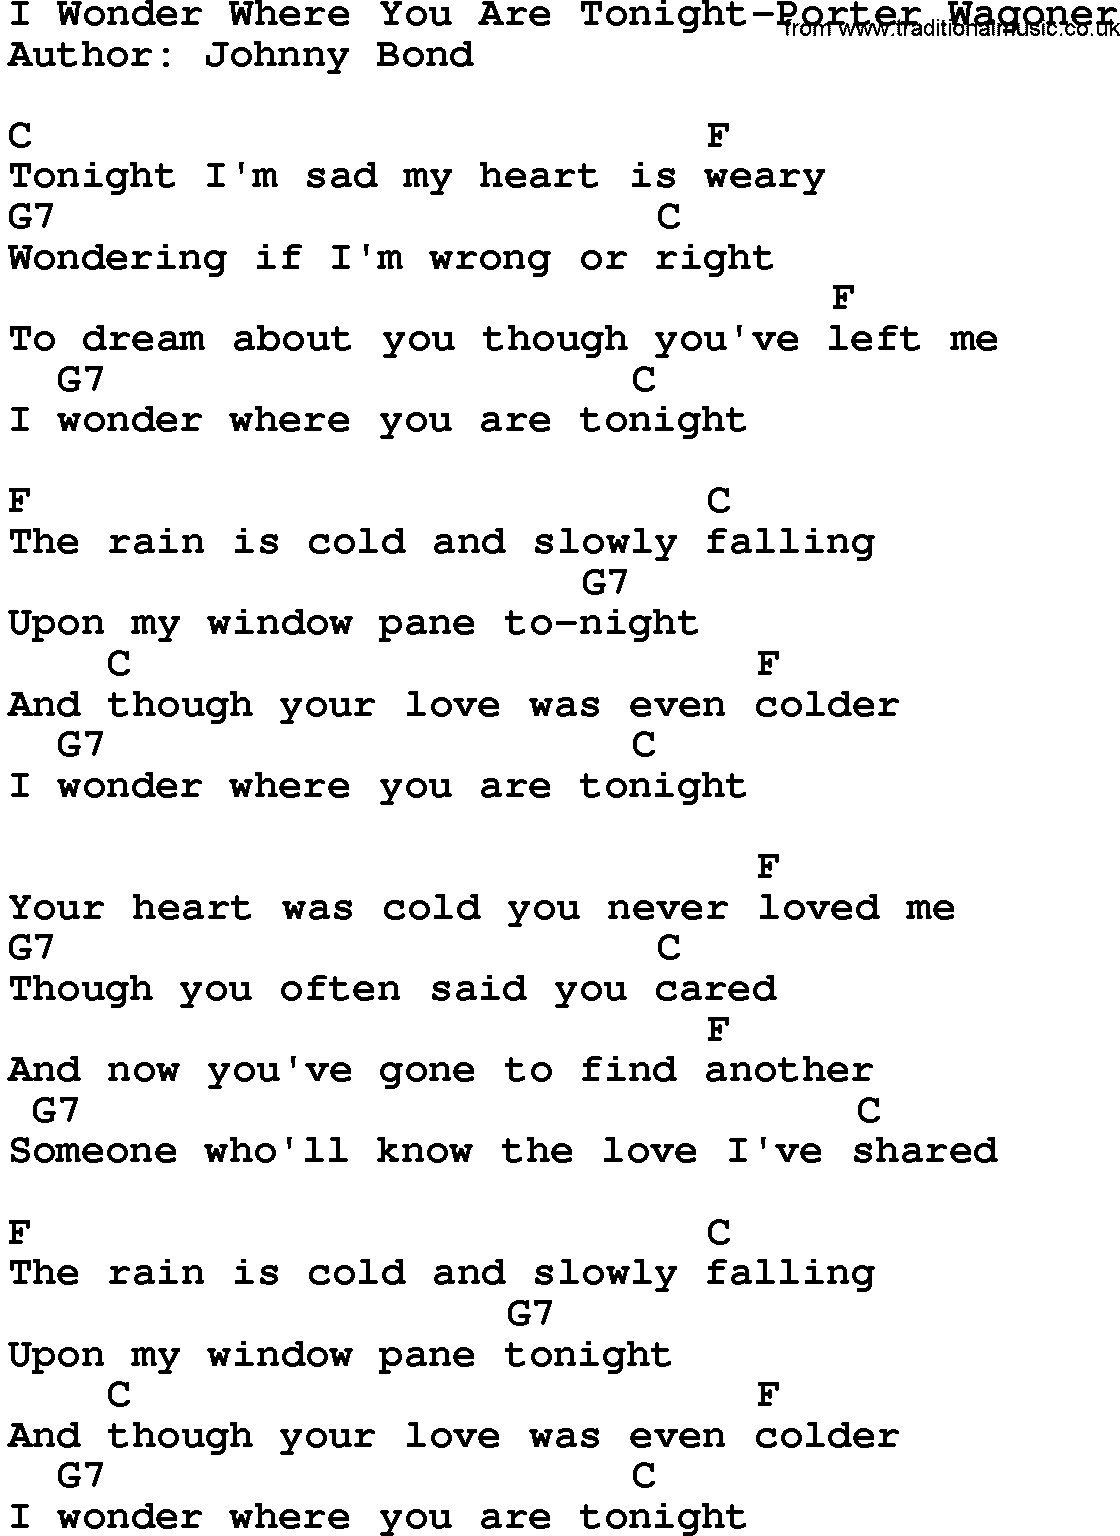 Country music song: I Wonder Where You Are Tonight-Porter Wagoner lyrics and chords